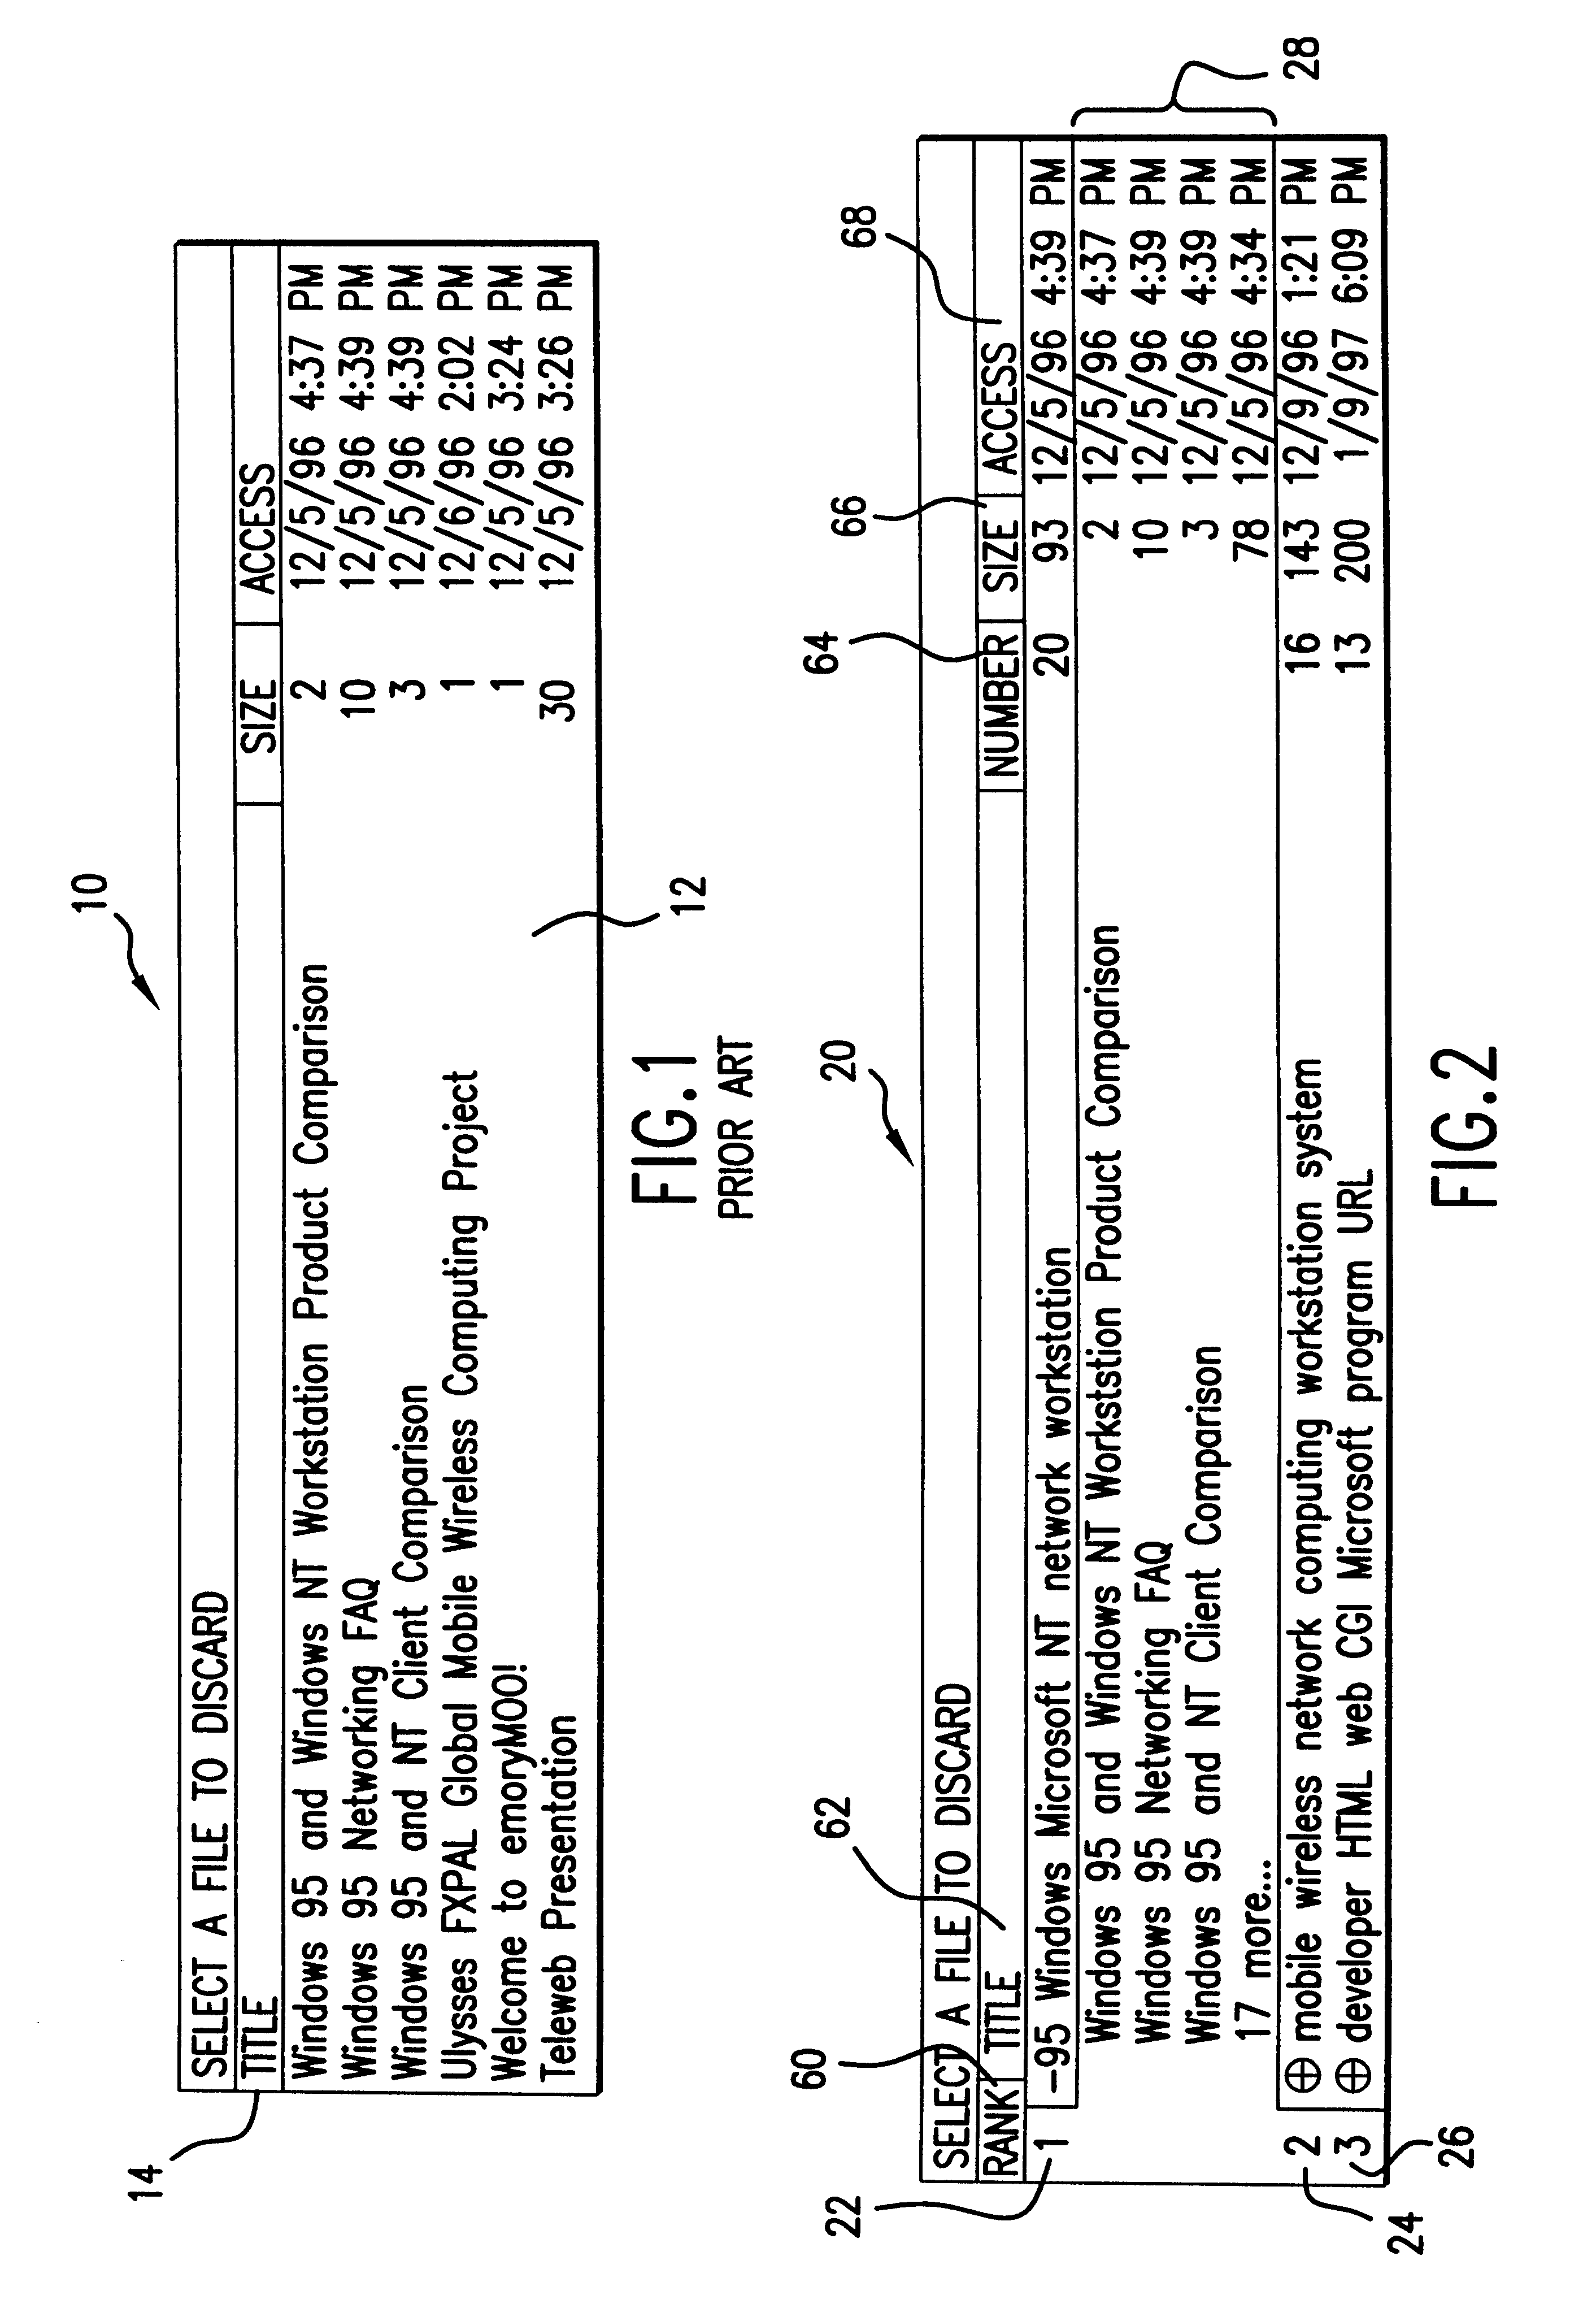 Document cache replacement policy for automatically generating groups of documents based on similarity of content